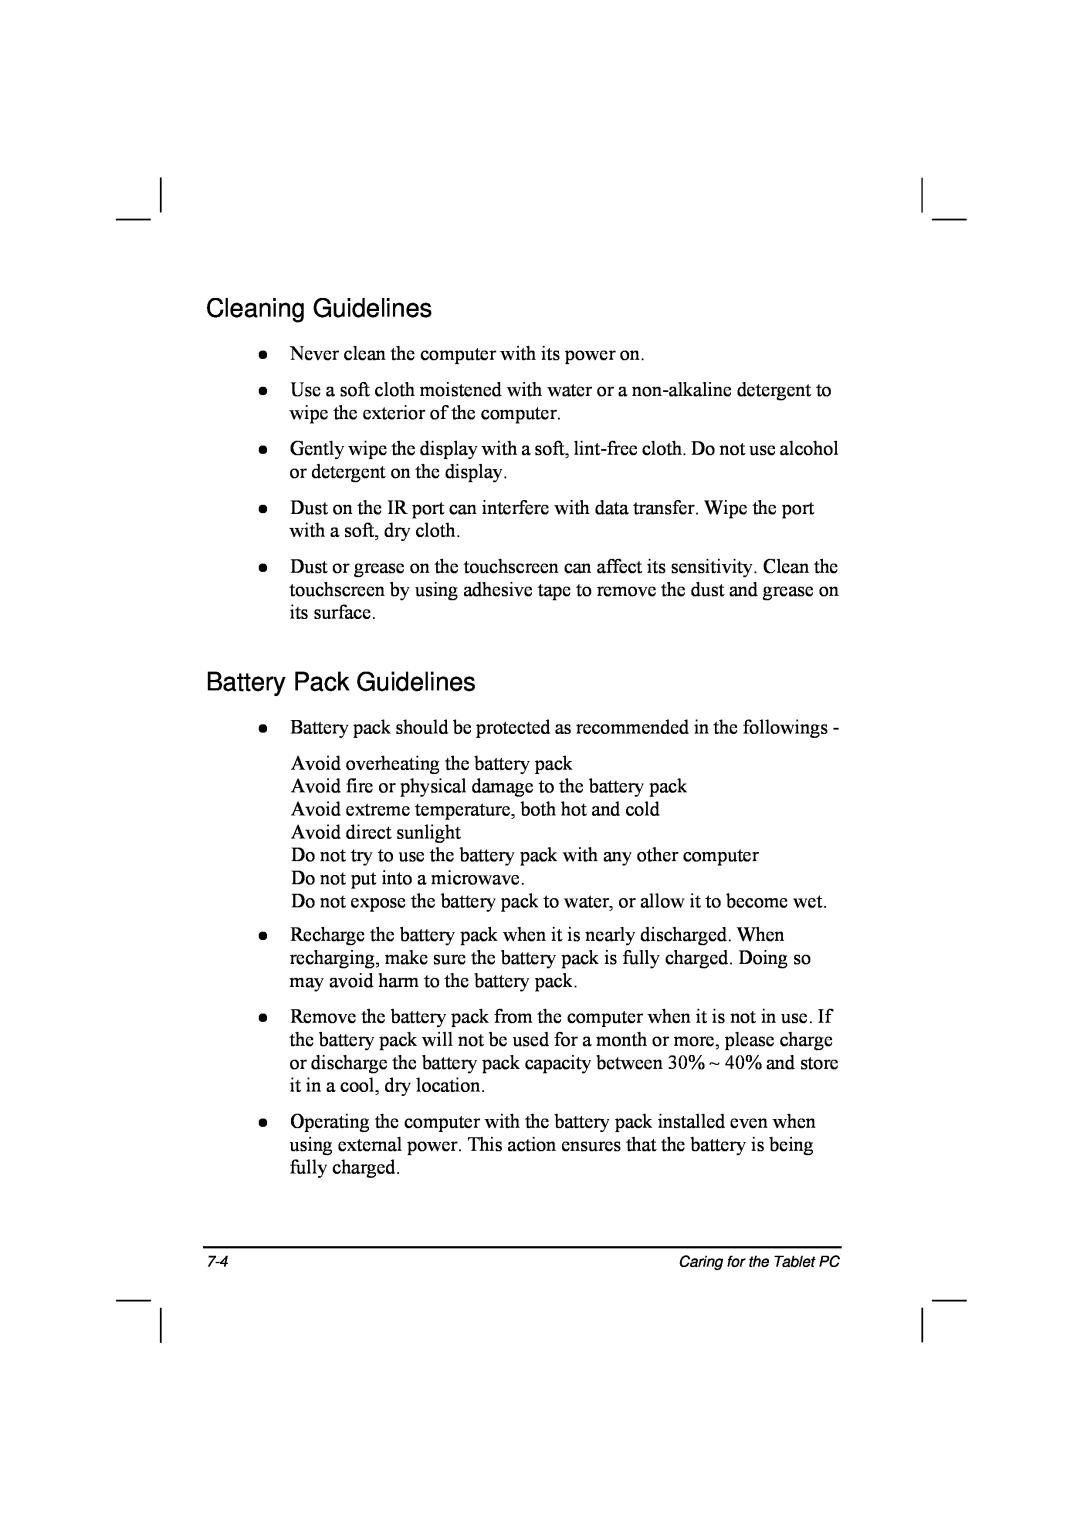 TAG 20 Series manual Cleaning Guidelines, Battery Pack Guidelines 